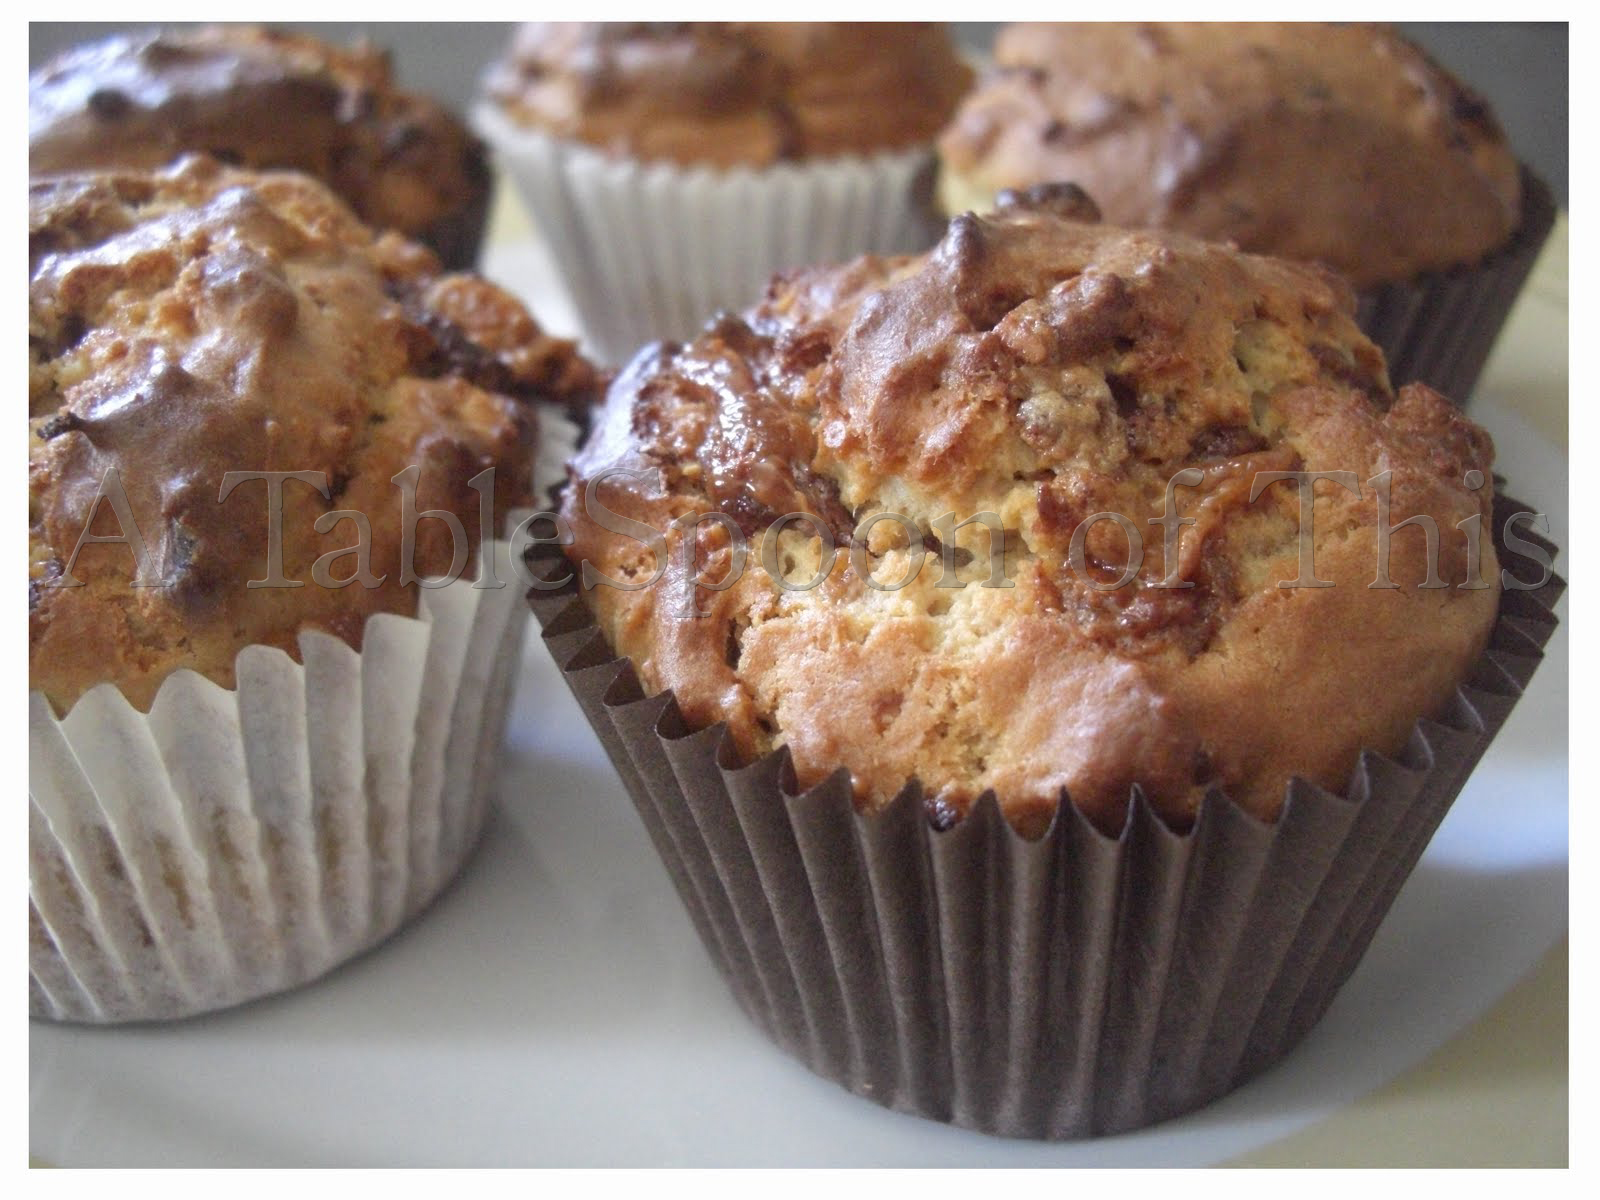 A TableSpoon Of This: Peanut butter and Snickers muffins